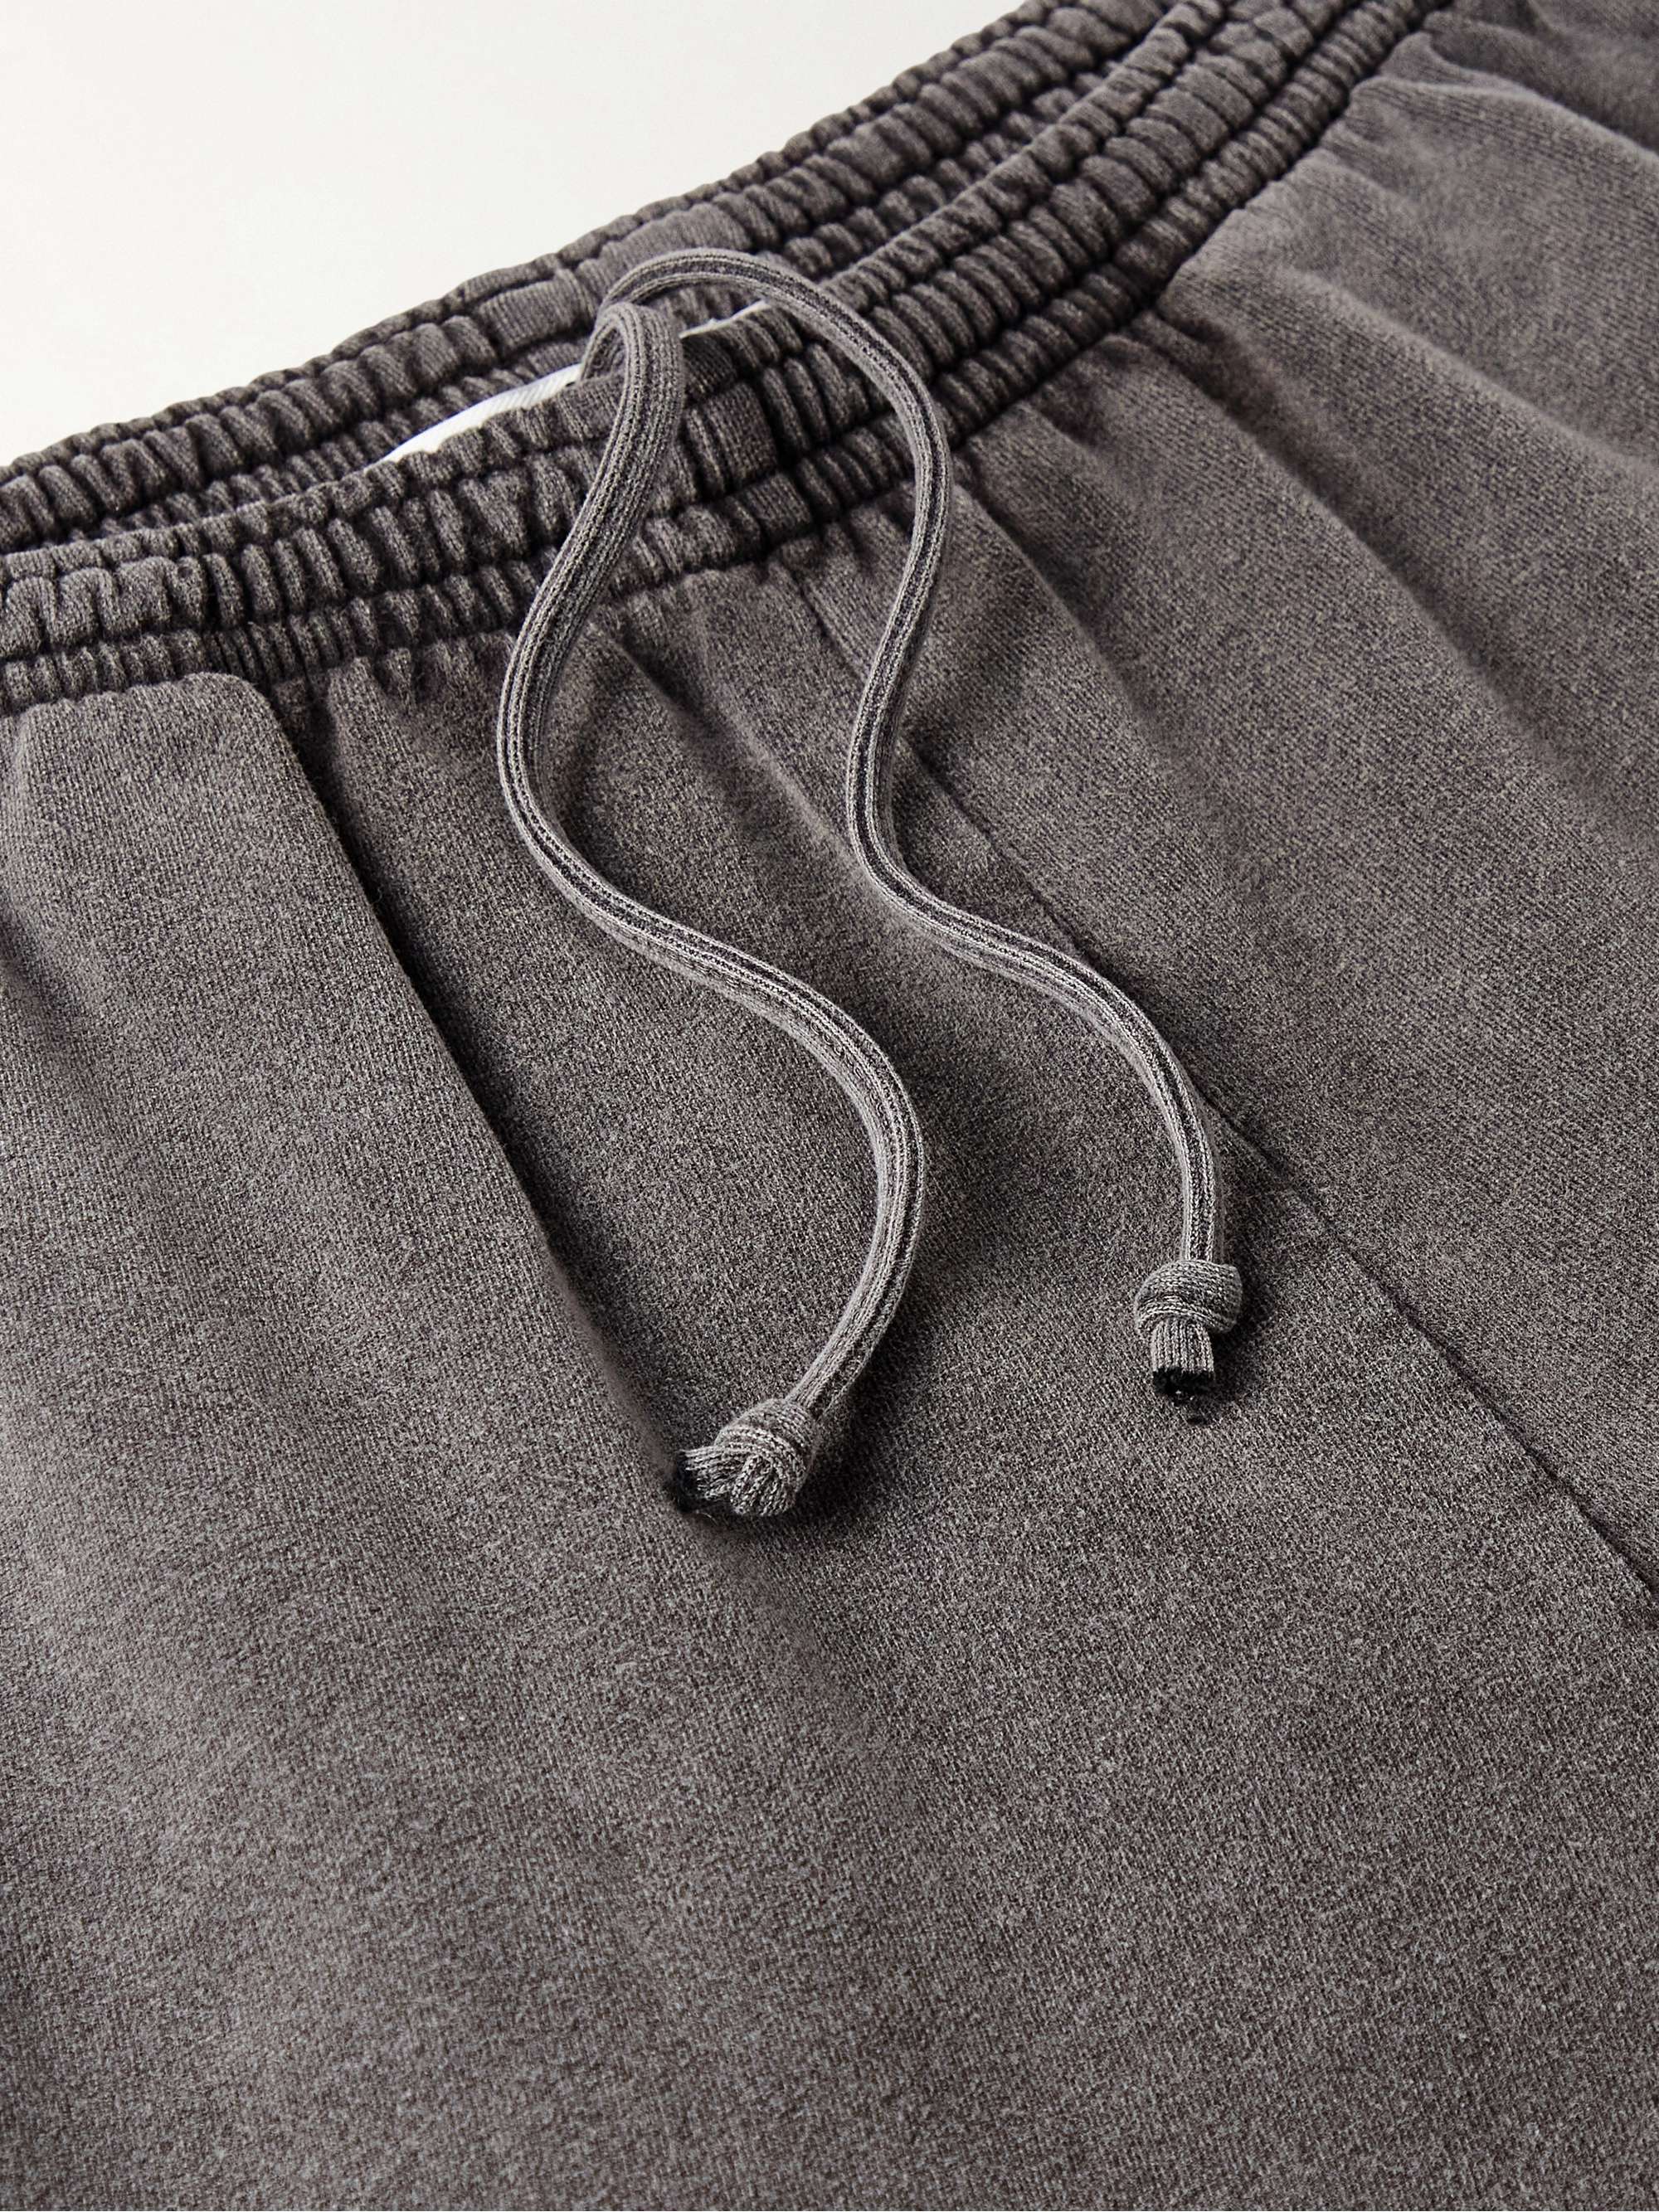 ACNE STUDIOS Tapered Cotton-Jersey Sweatpants